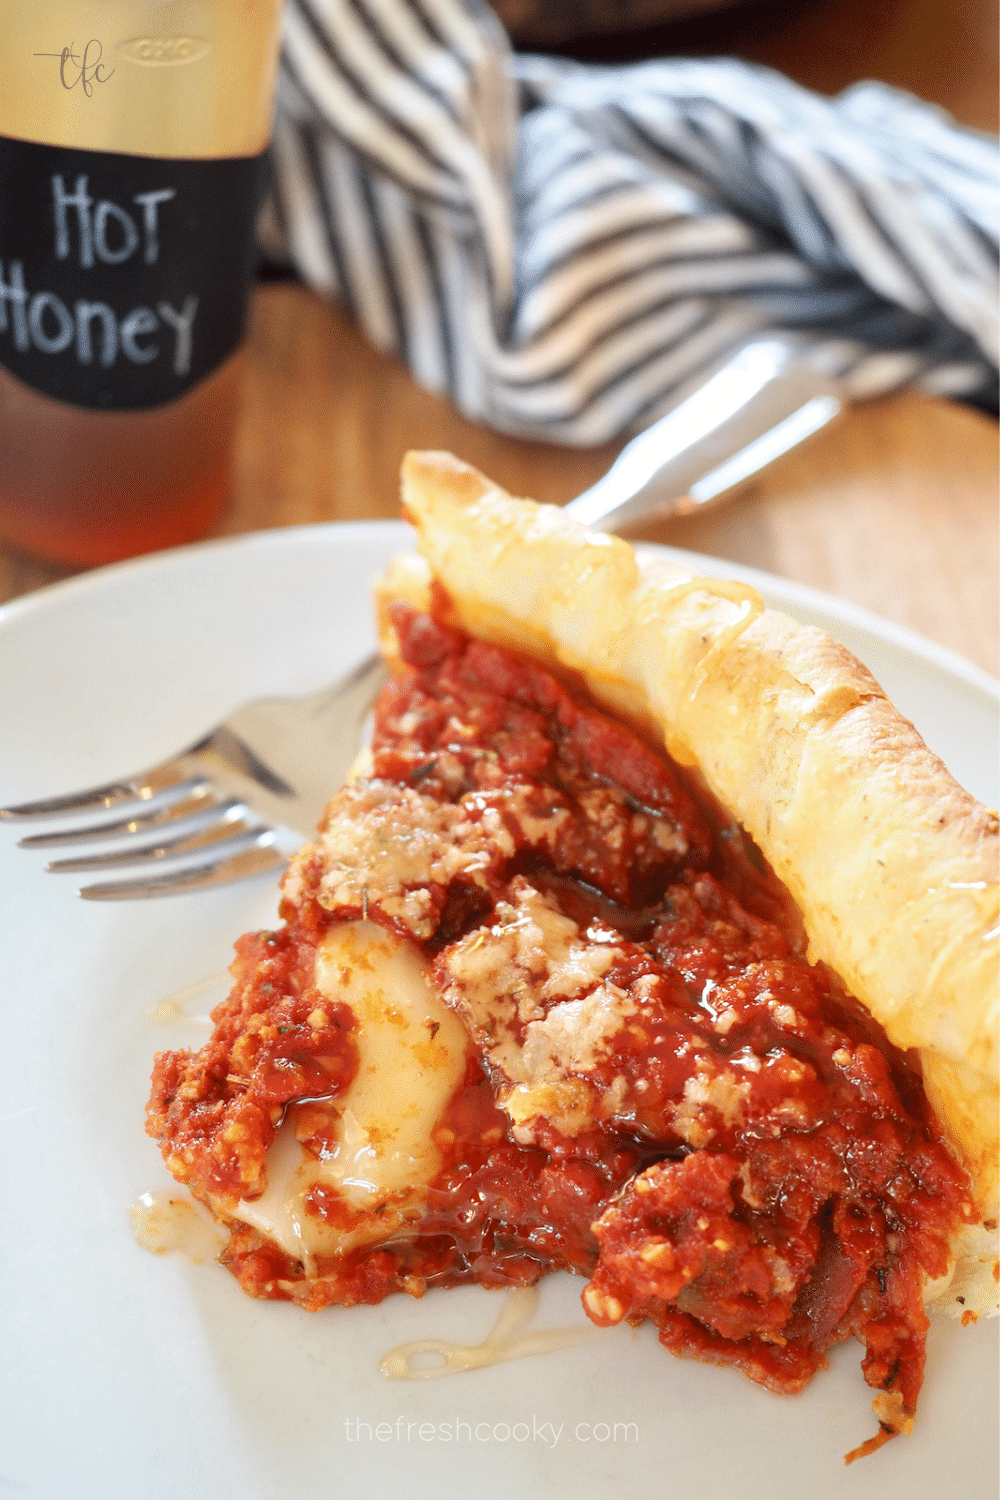 Image of slice of deep dish Chicago style pan pizza on plate with a fork and hot honey behind.